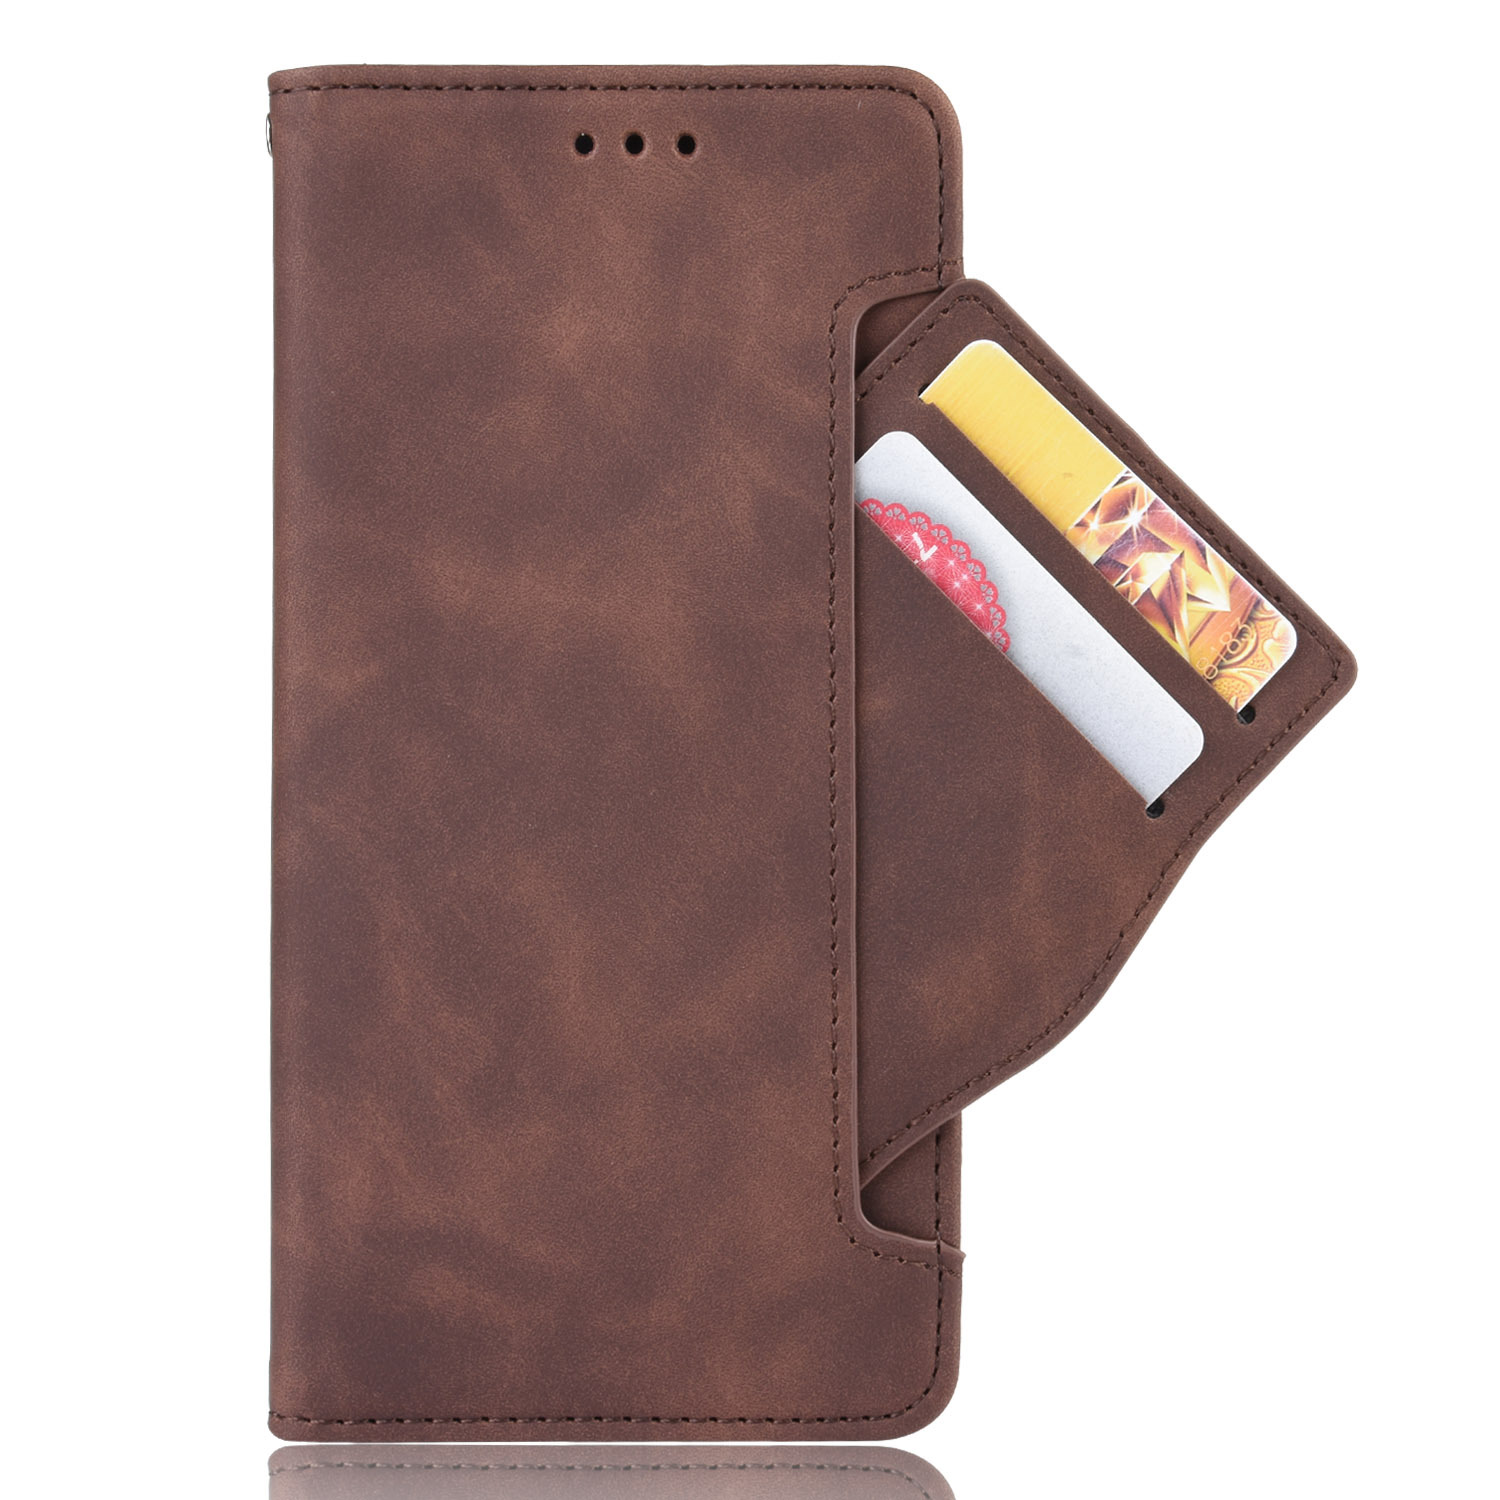 Bakeey for Doogee S88 Pro/ Doogee S88 Plus Case Magnetic Flip with Multiple Card Slot Wallet Folding Stand PU Leather Shockproof Full Cover Protective Case